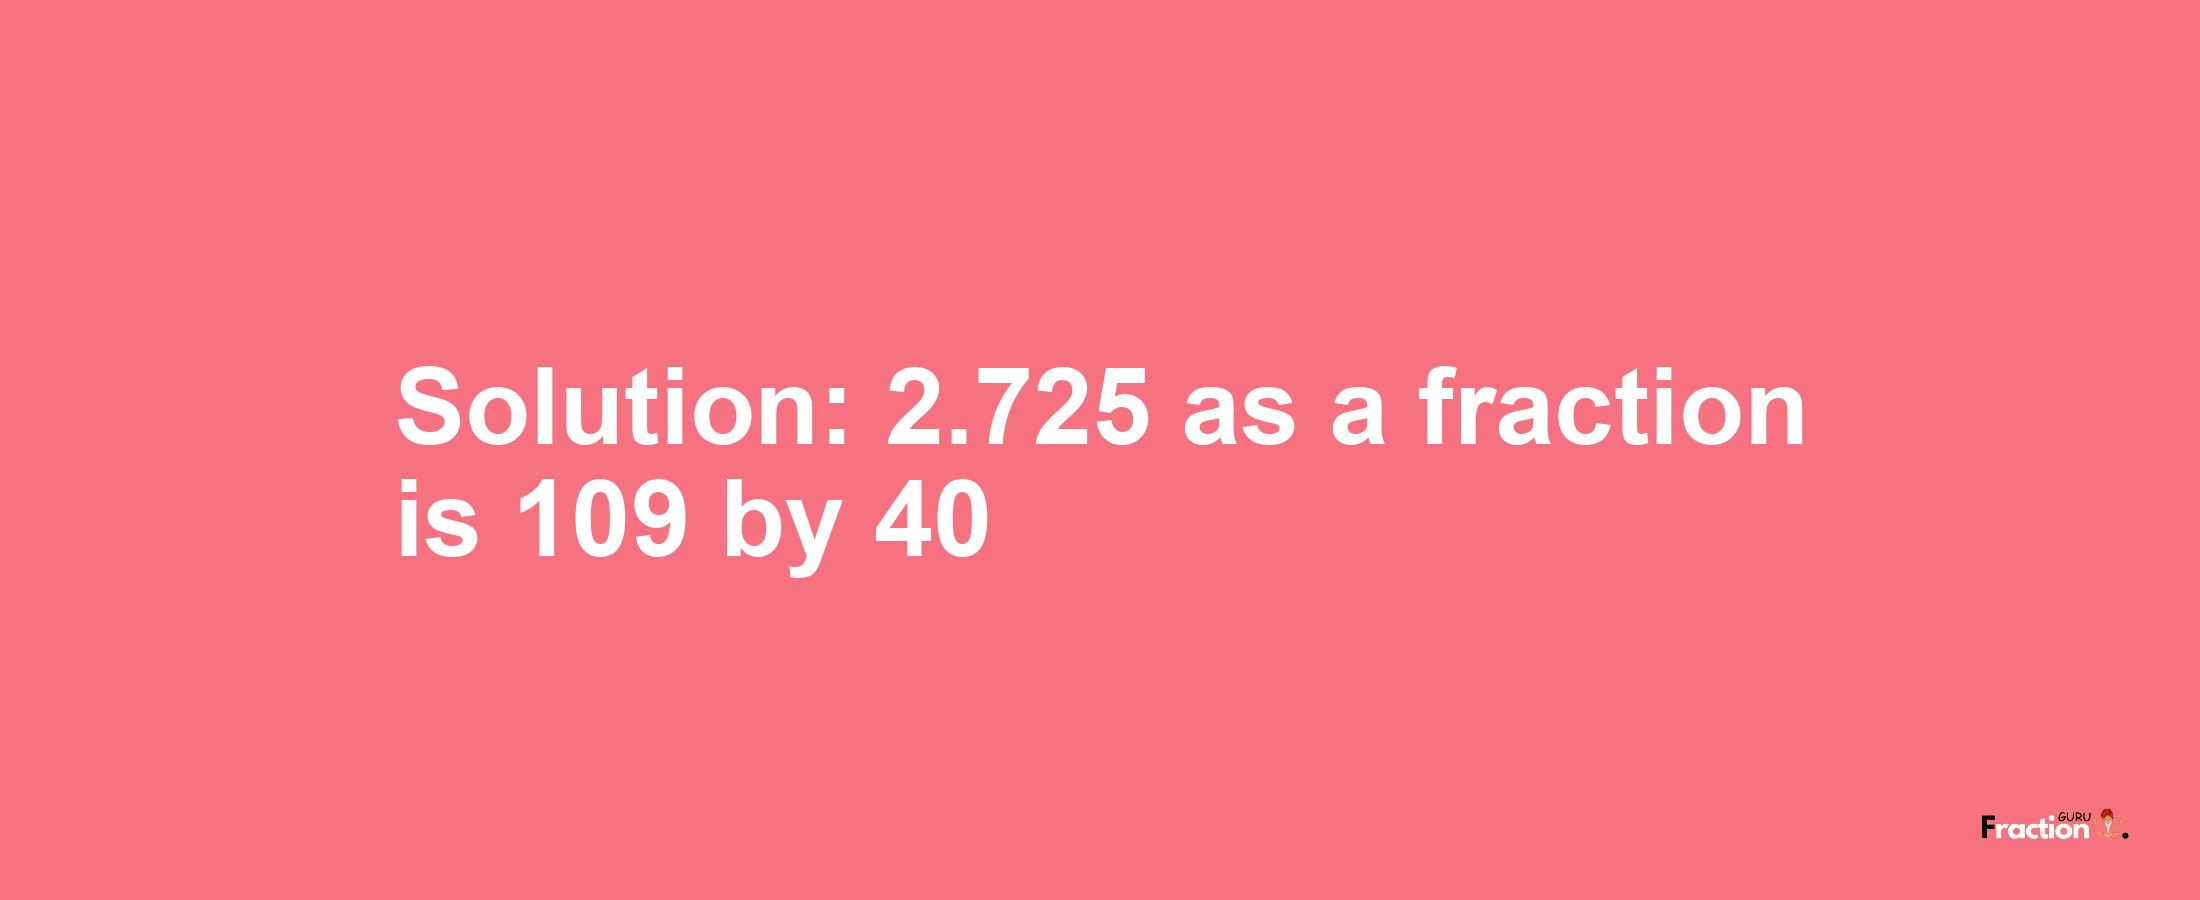 Solution:2.725 as a fraction is 109/40